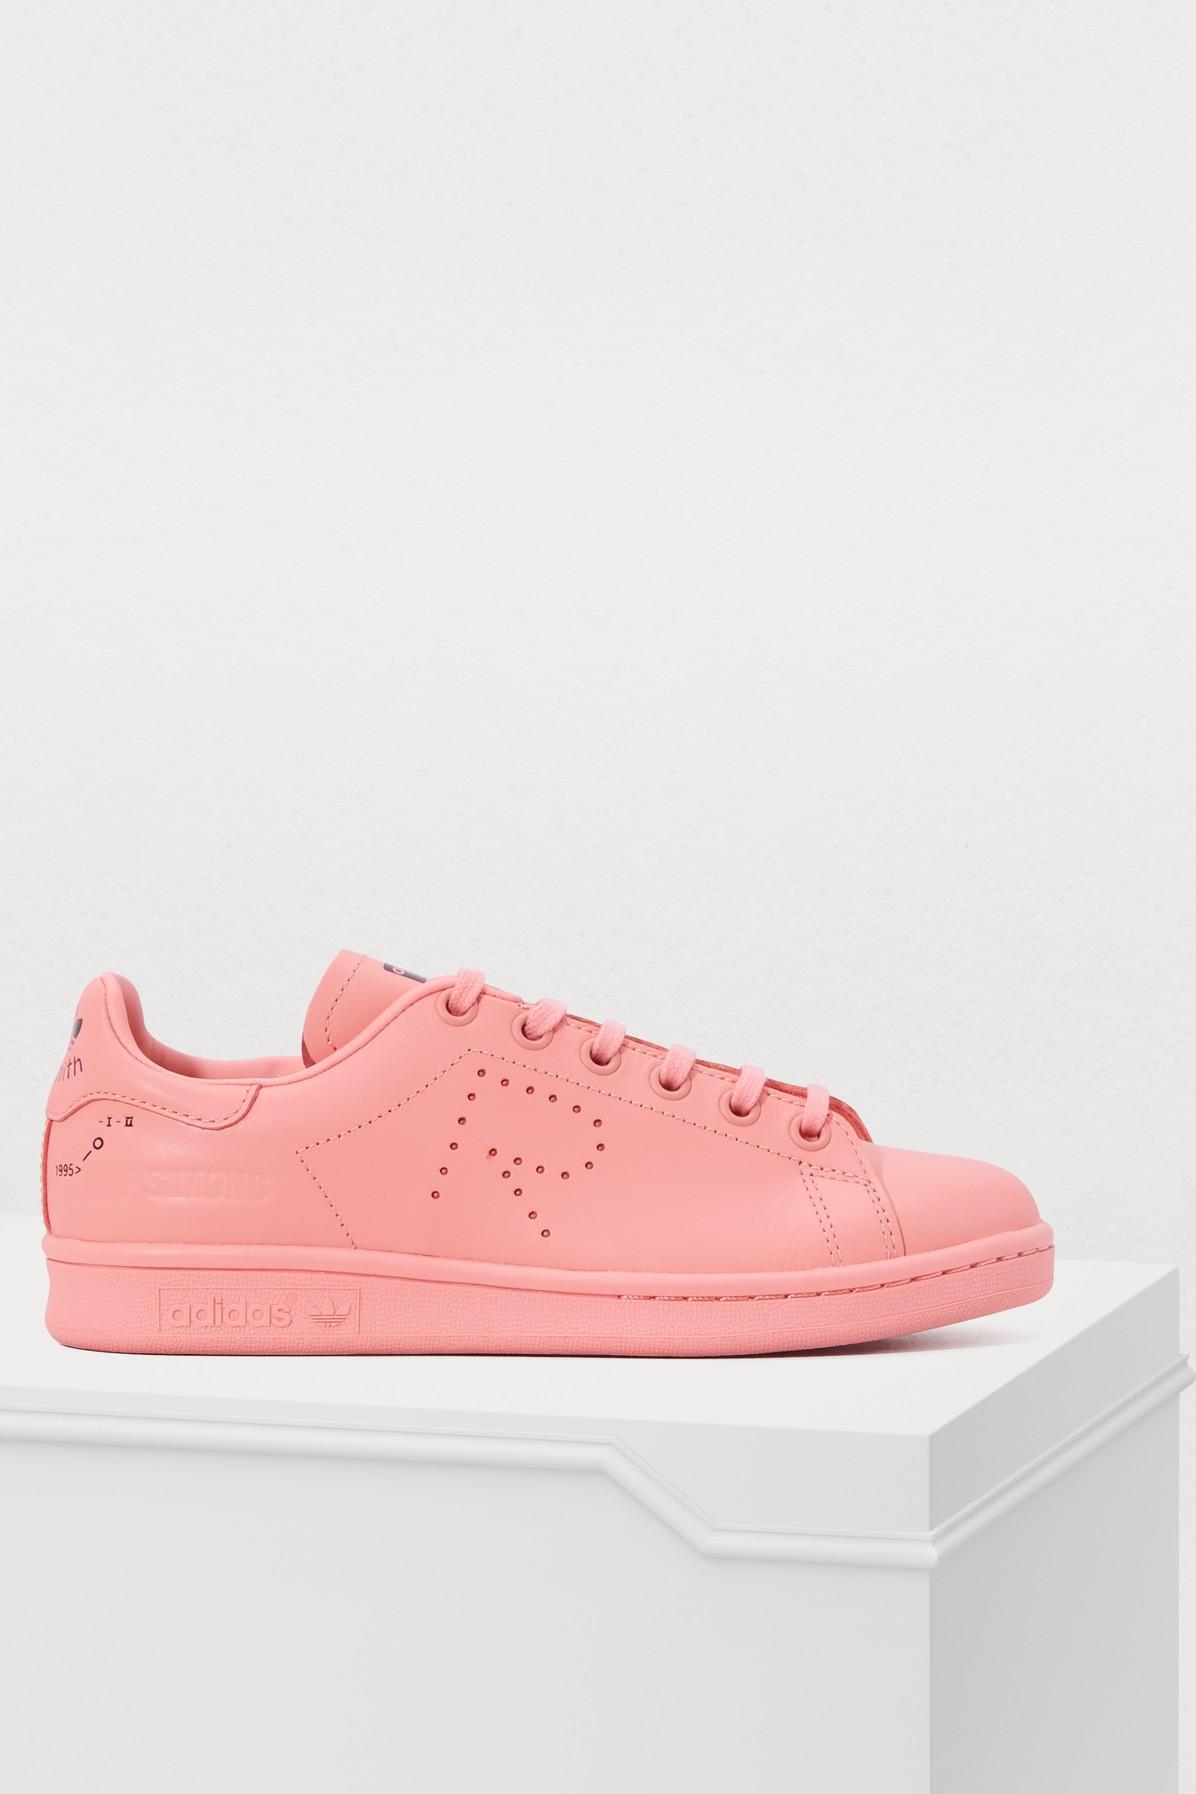 Adidas By Raf Simons Rs Stan Smith Sneakers In Tacros/blipnk/ftwwht |  ModeSens